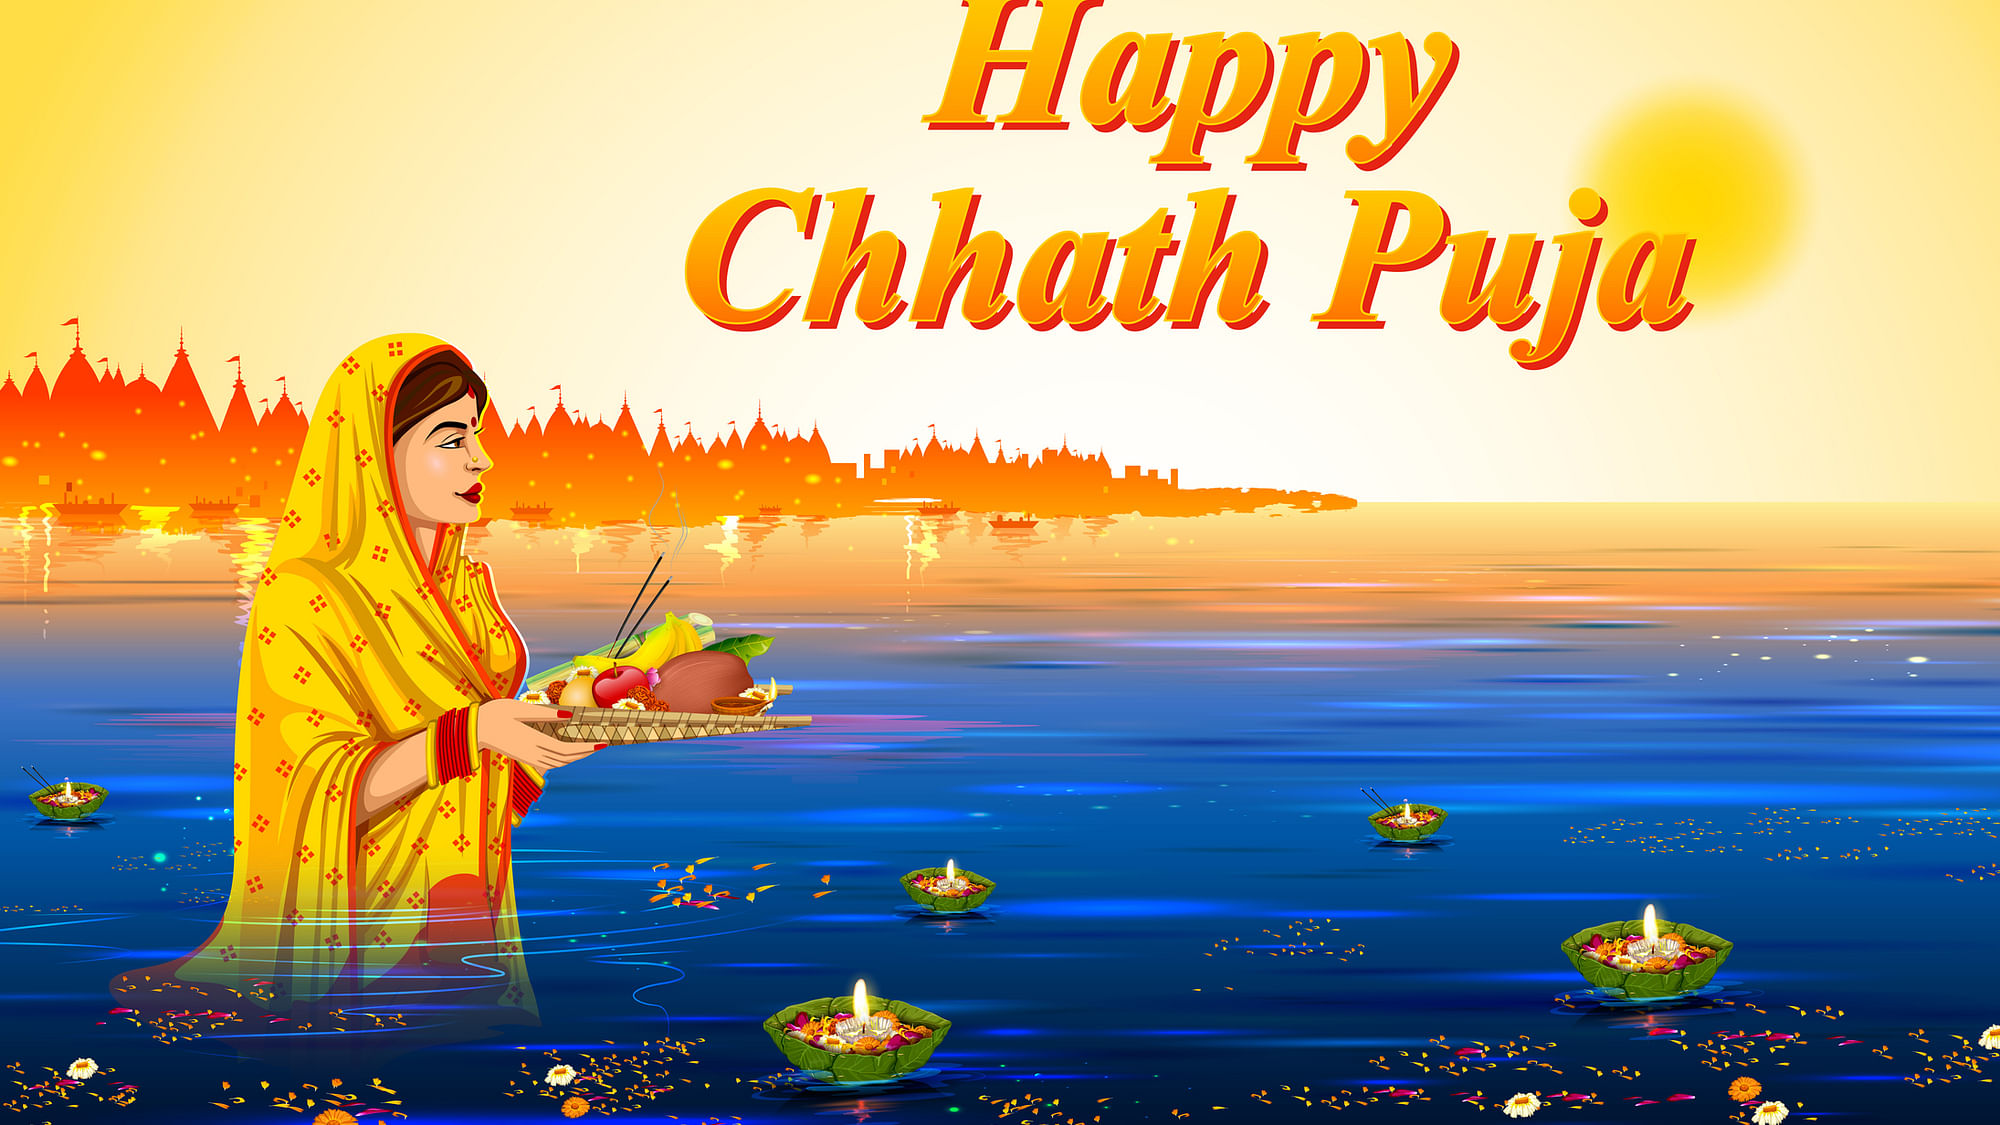 Happy Chhath Puja 2020 Wishes and Quotes